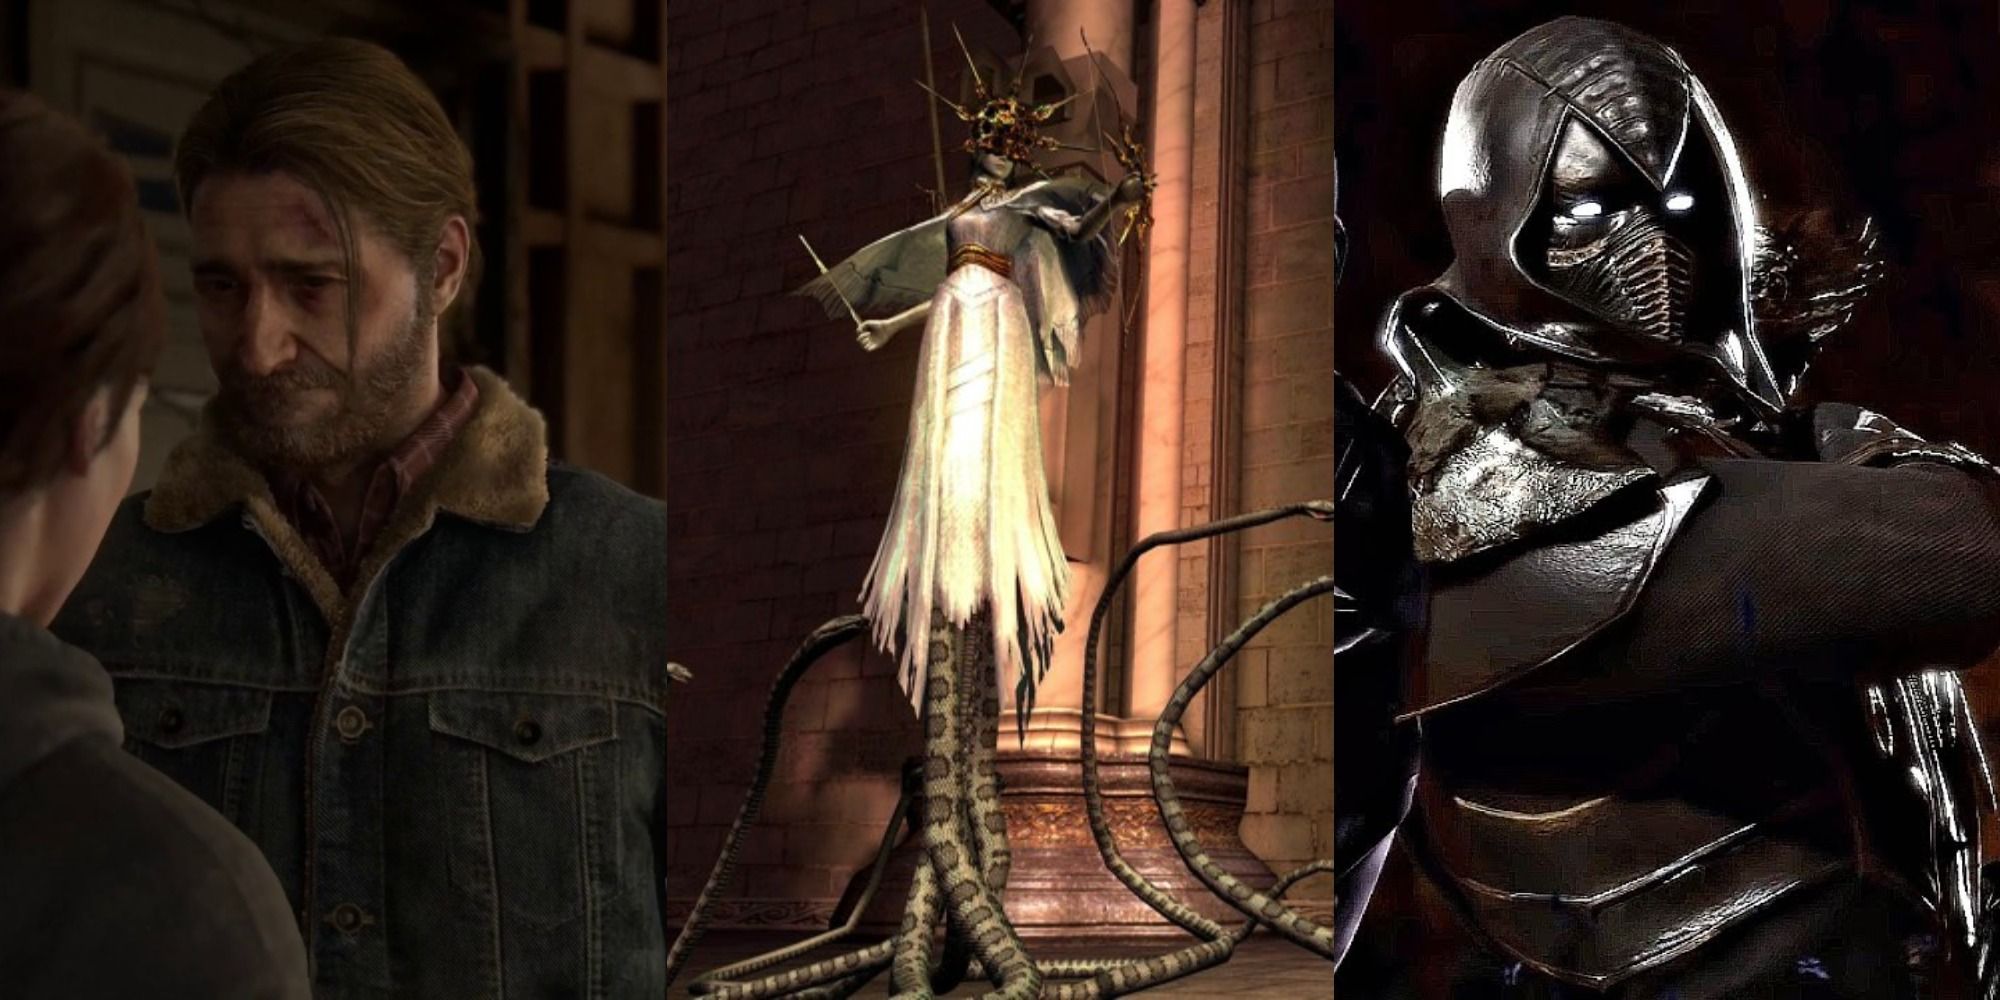 Worst Brothers in Gaming Tommy Last of Us 2, Dark Sun Gwyndolin Dark Souls, and Noob Saibot MK11 Split Featured